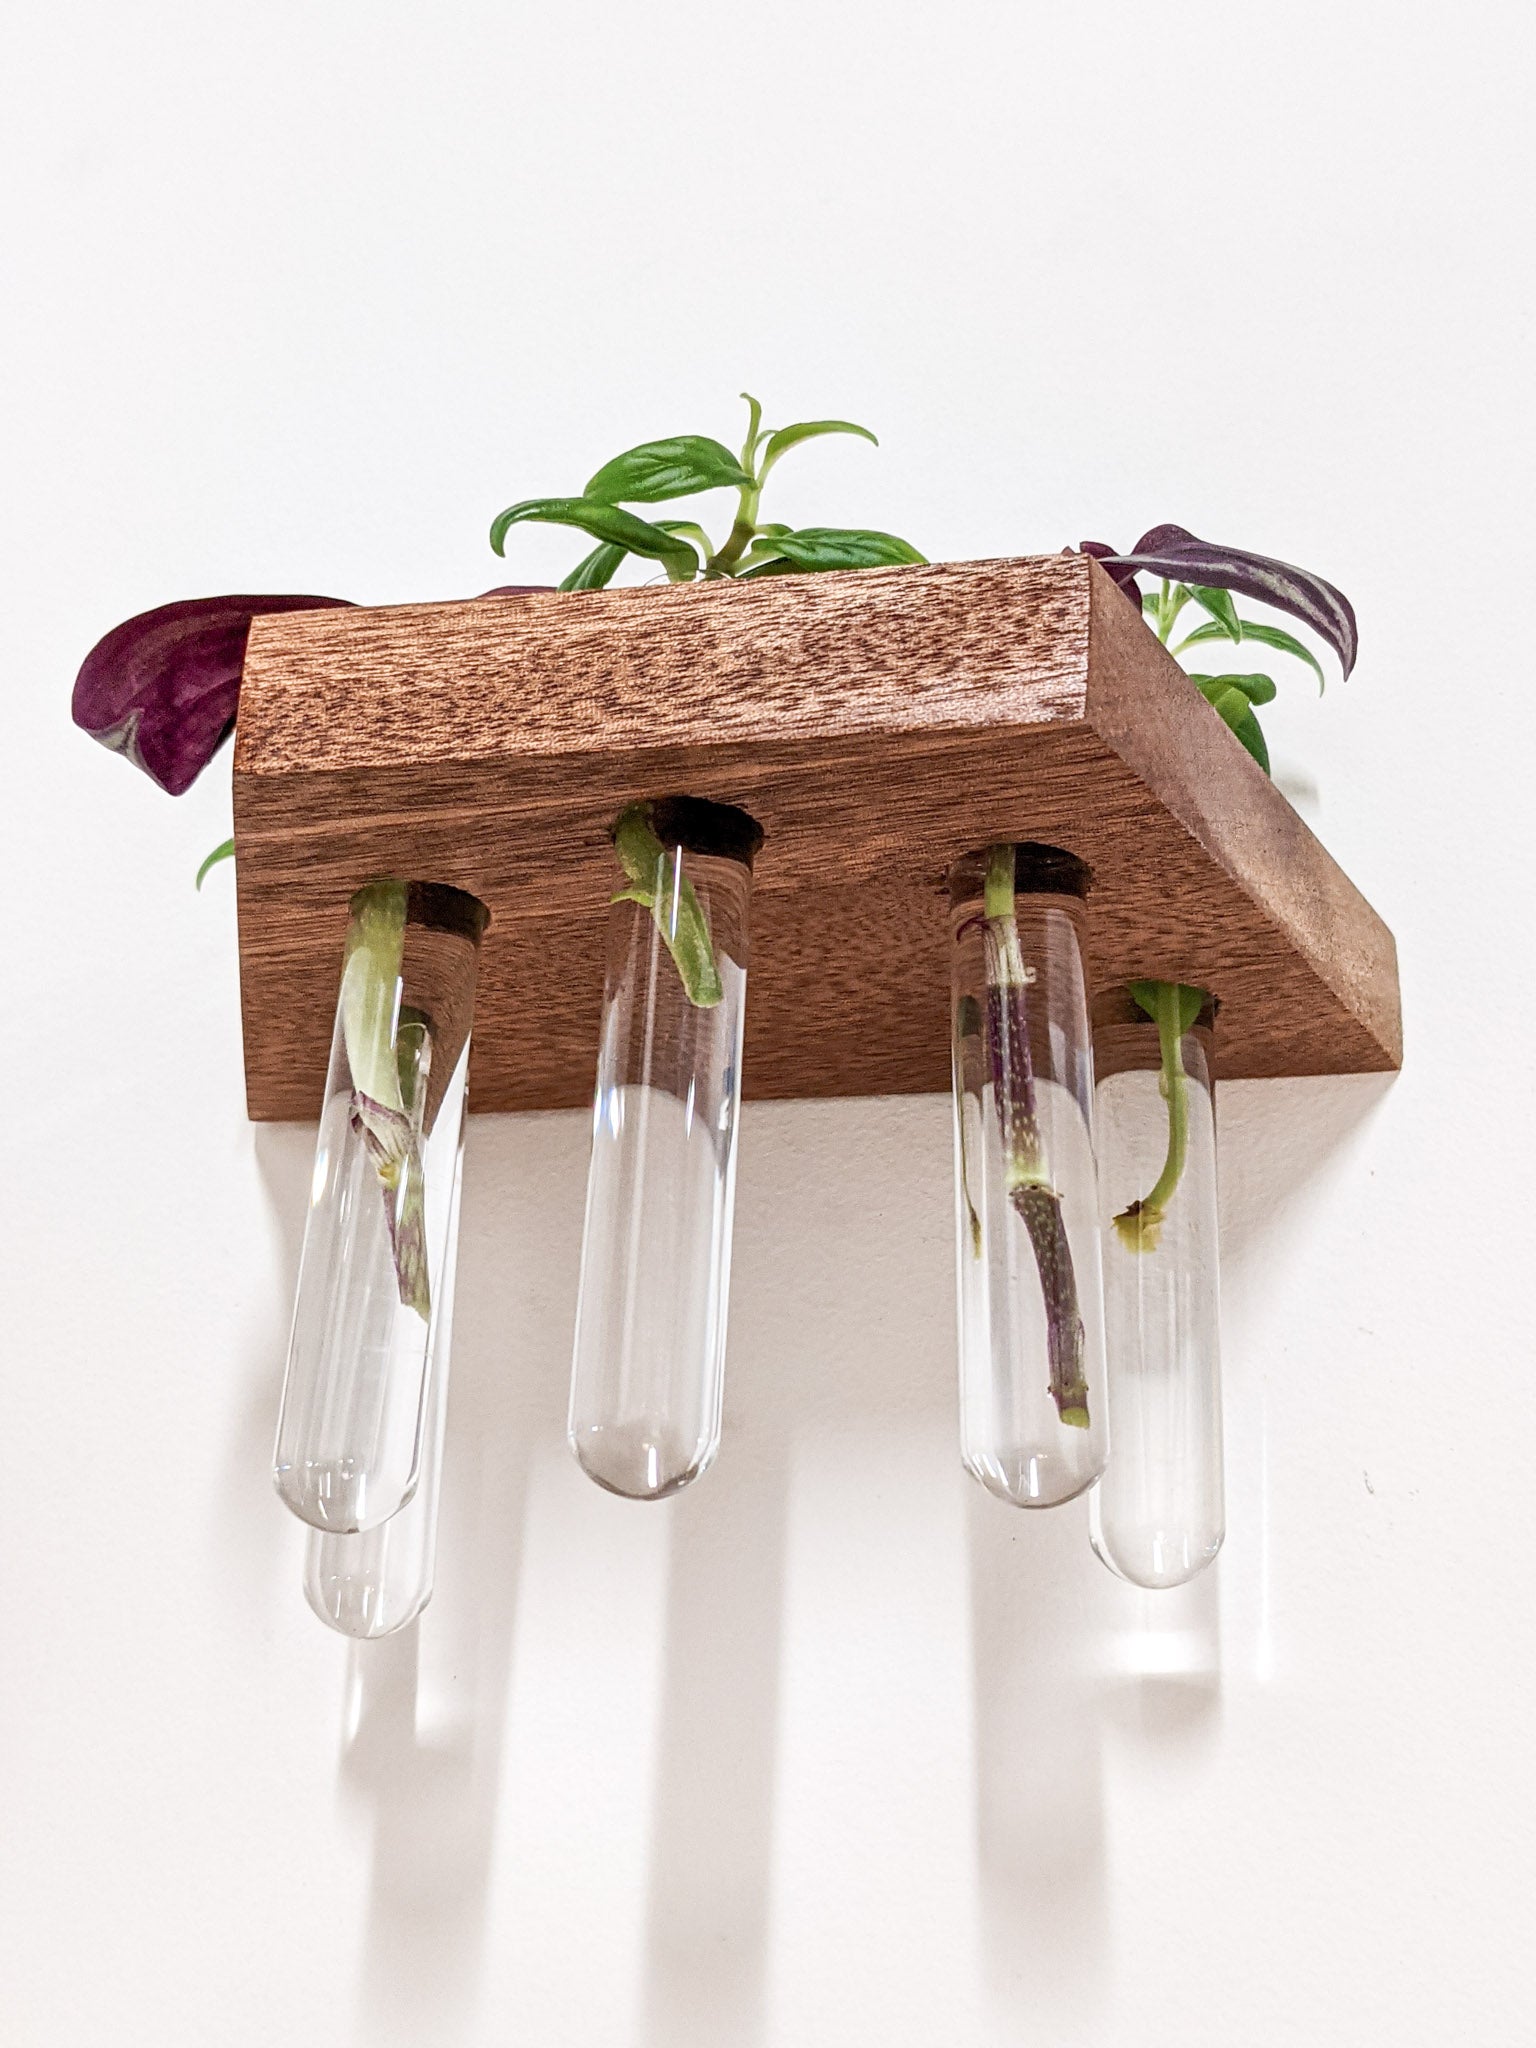 A bottom view of the mahogany trapezoid propagation shelf. A variety of glass test tubes dangle from the trapezoid floating shelf that is wall-mounted. The vials are filled with various cuttings of plants that peek over the top of the shelf.